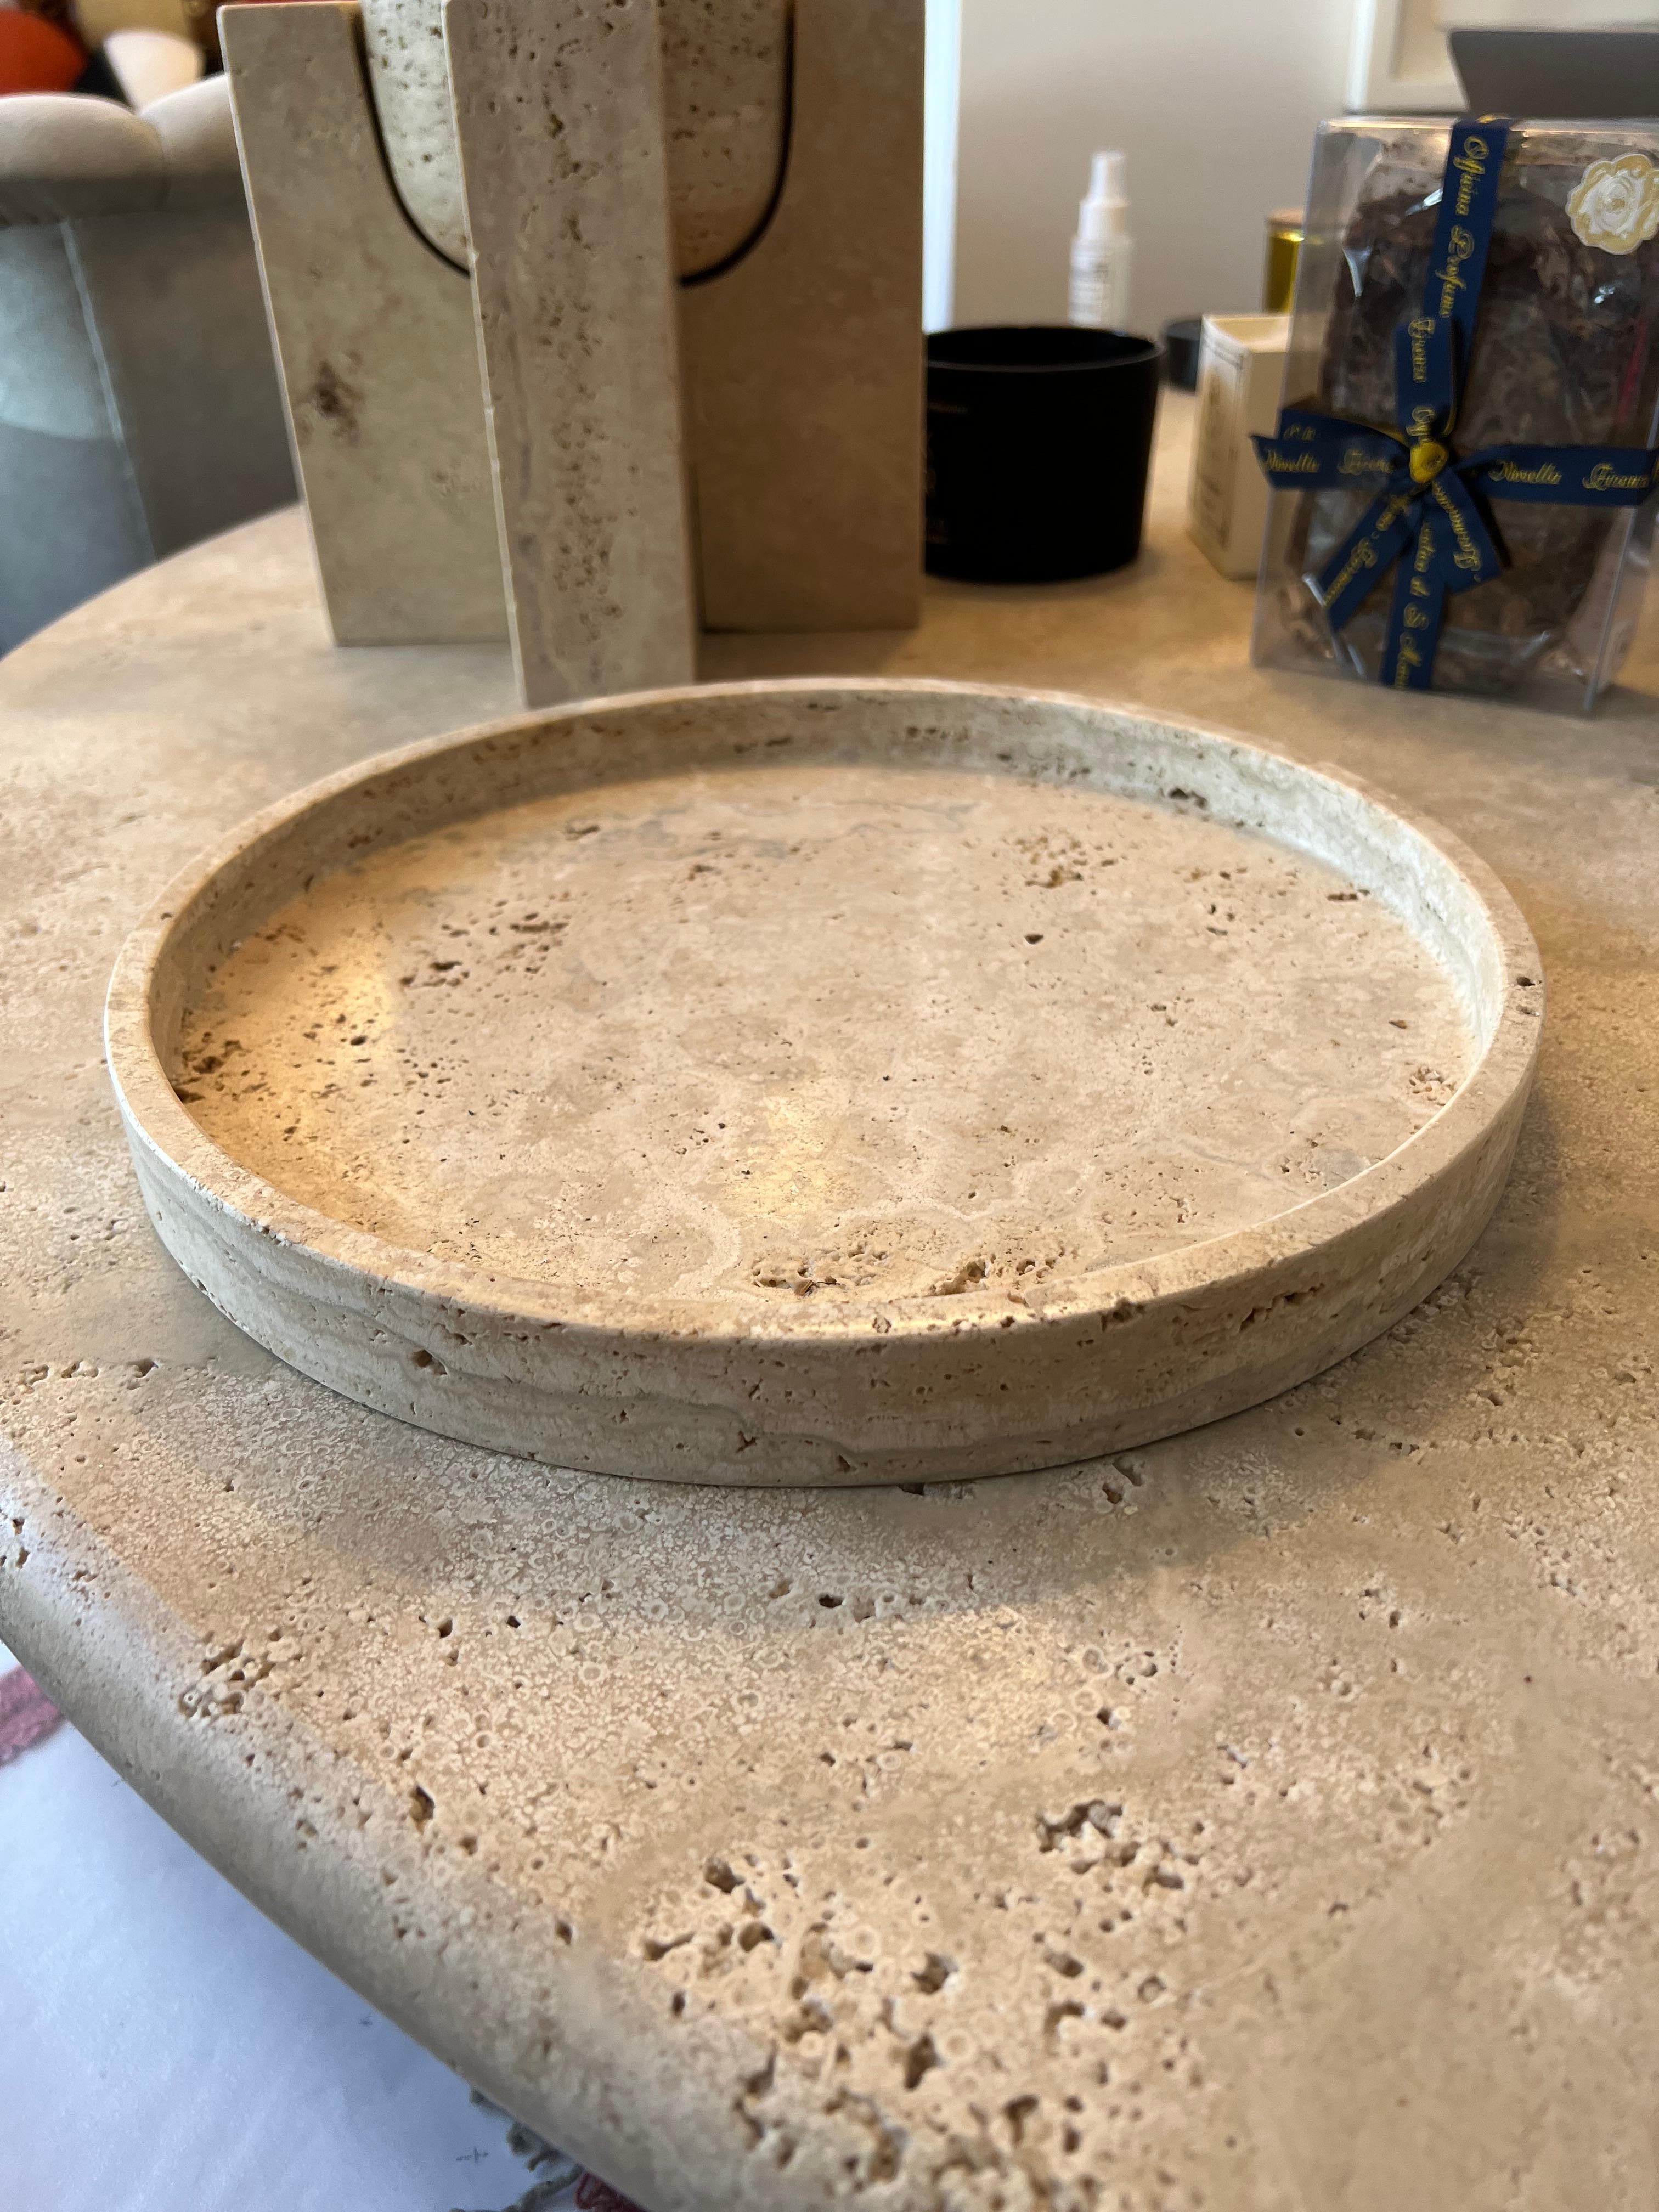 Roman round travertine tray by Le Lampade.
Made in Italy 
This item can be also custom made.